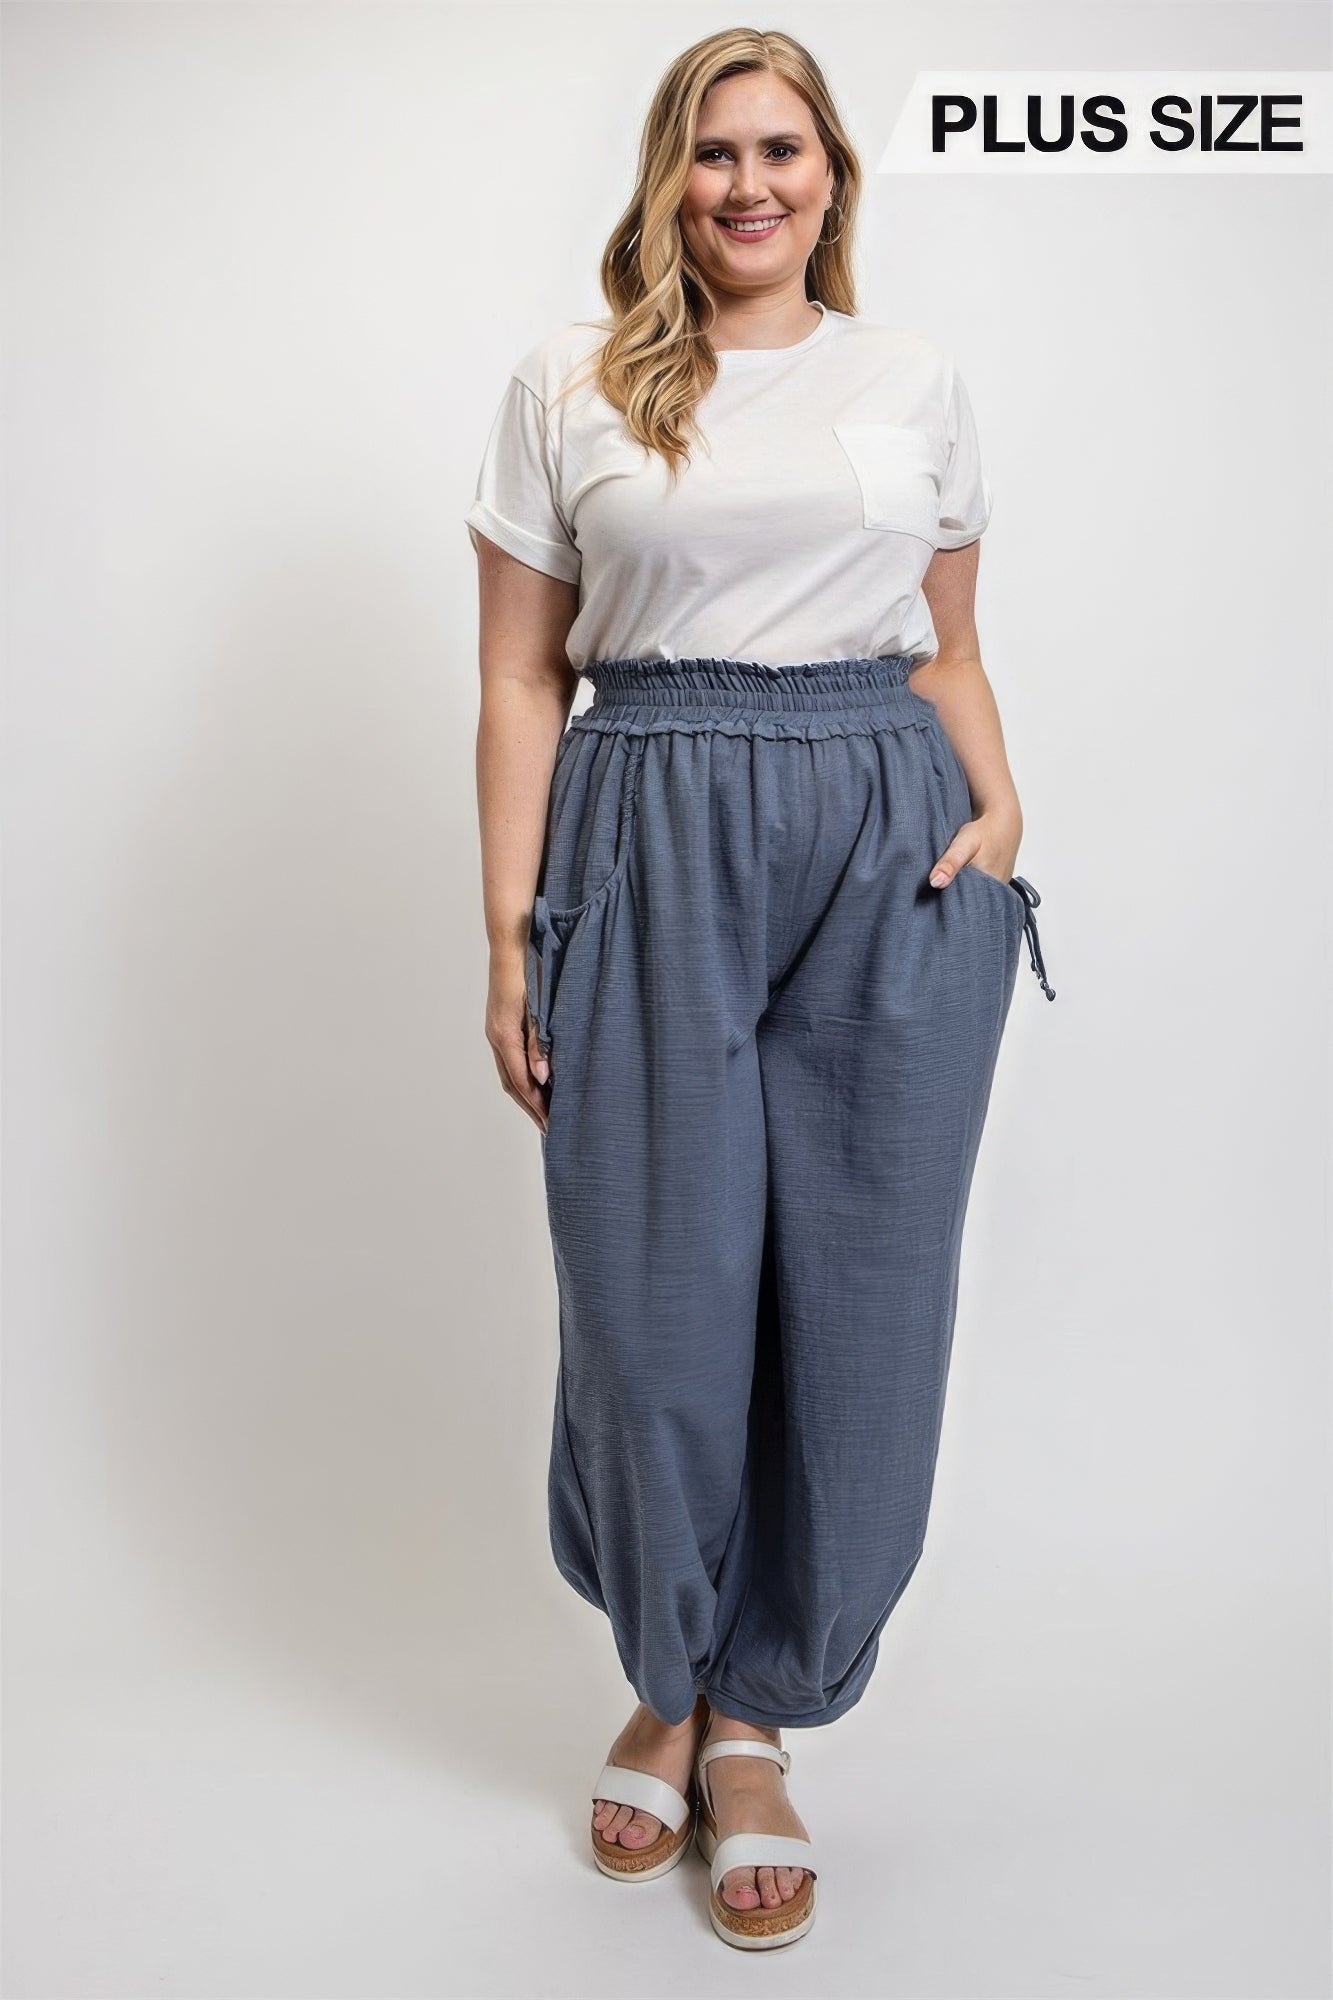 Voluptuous (+) Voluminous Relaxed Fit Plus Size Pant With Side Pocket for Women